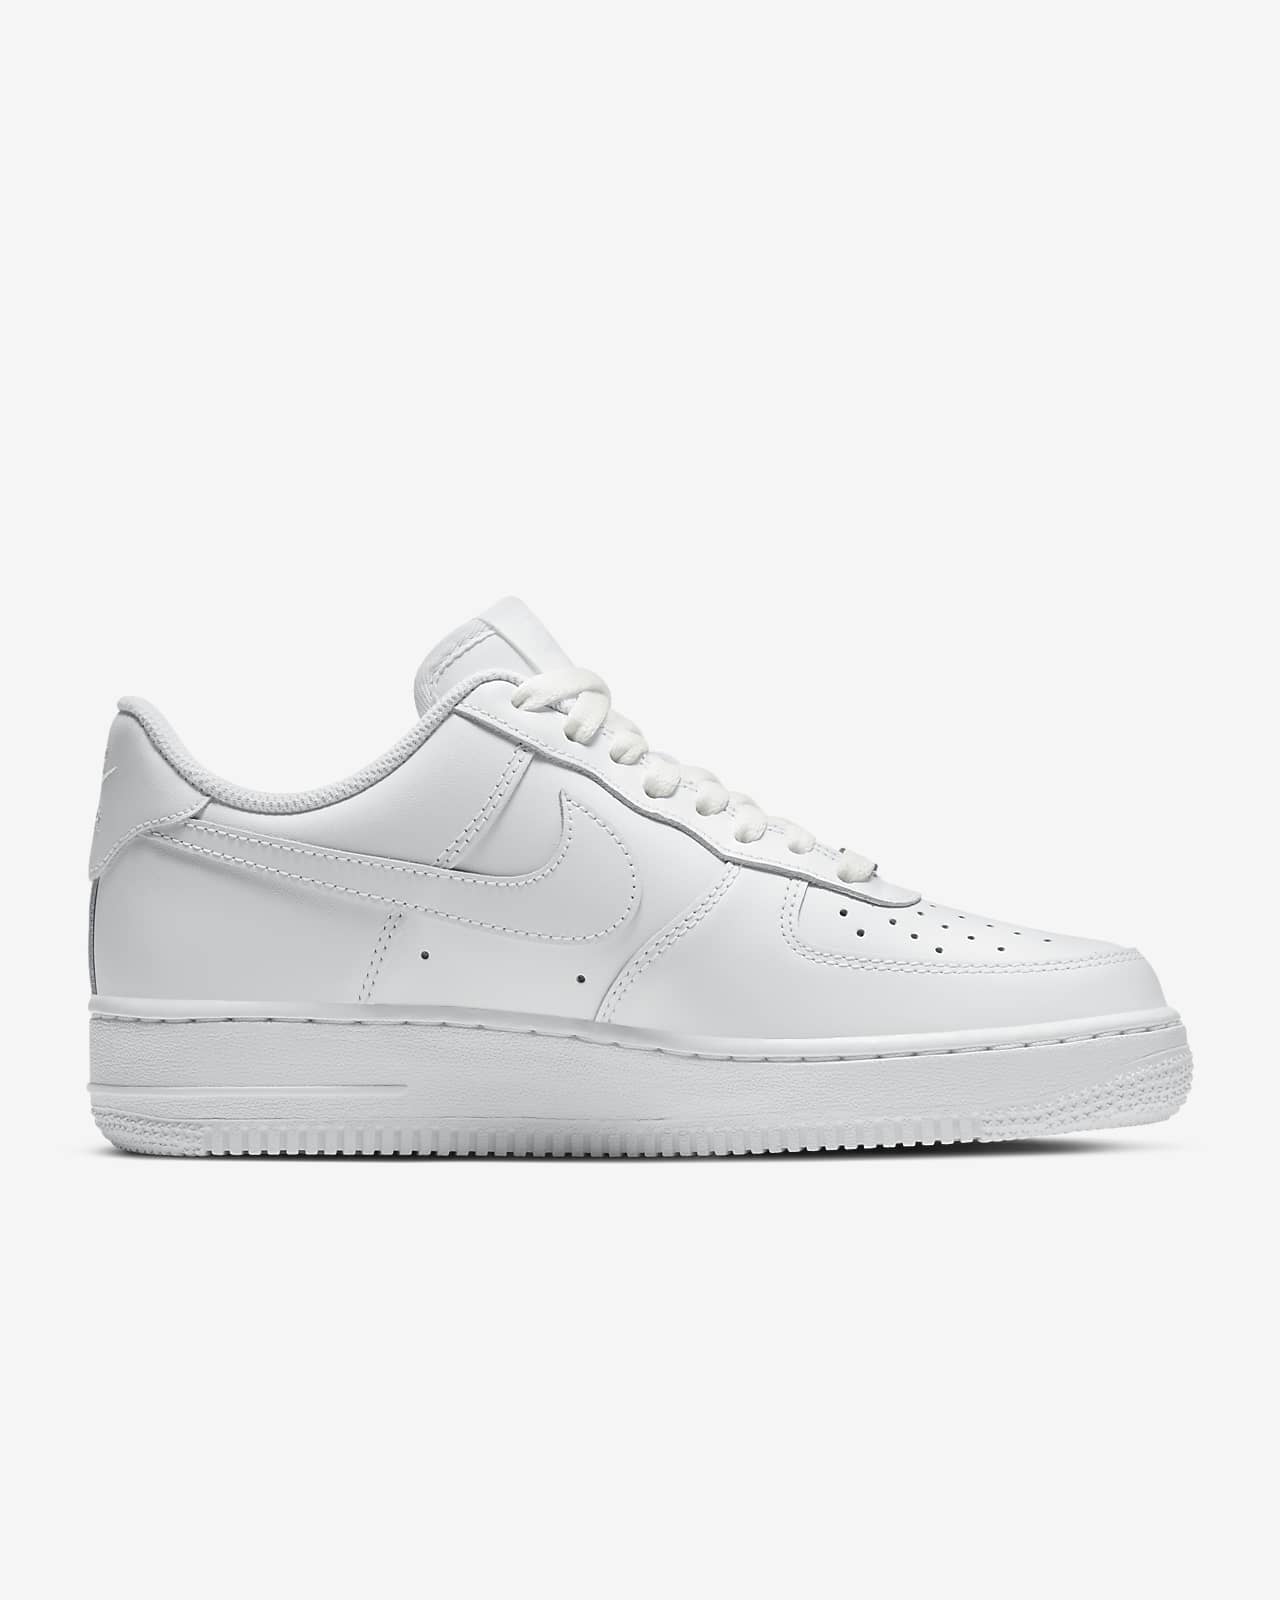 Nike Air Force af1 all white 1 '07 Women's Shoes. Nike.com